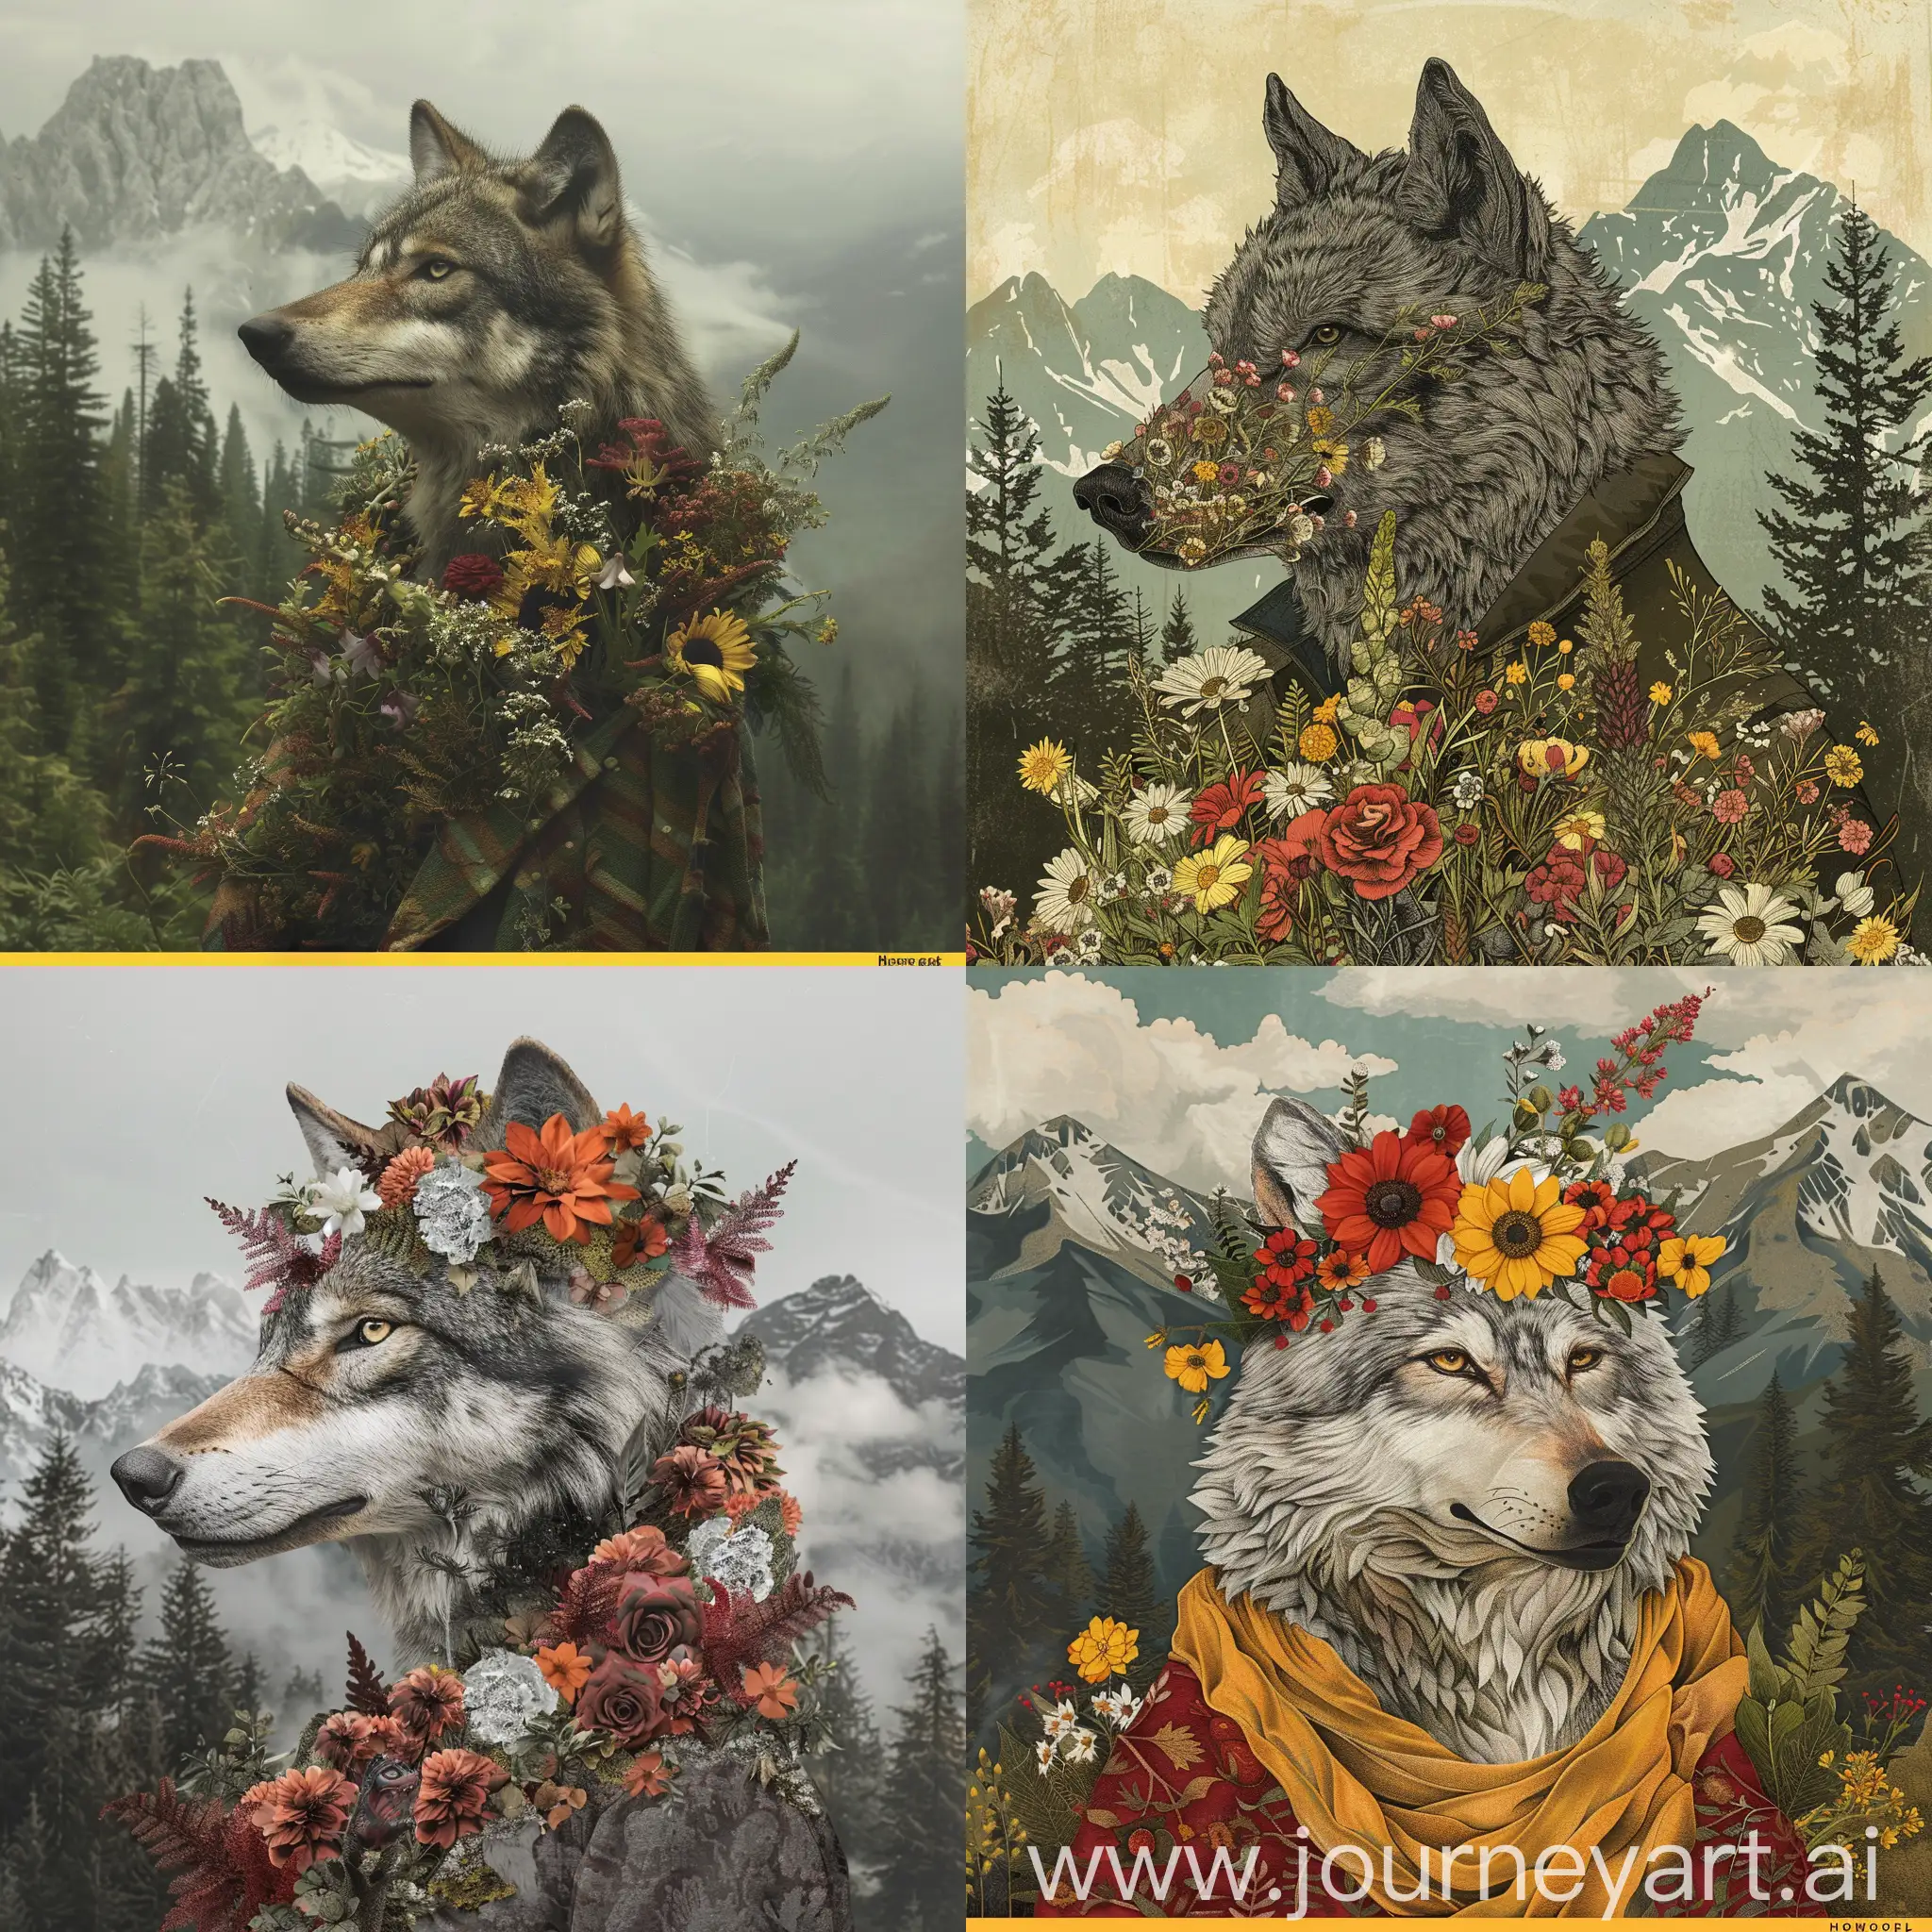 Wolfman-Offering-Flowers-in-the-Wild-Nature-of-Mountains-and-Forest